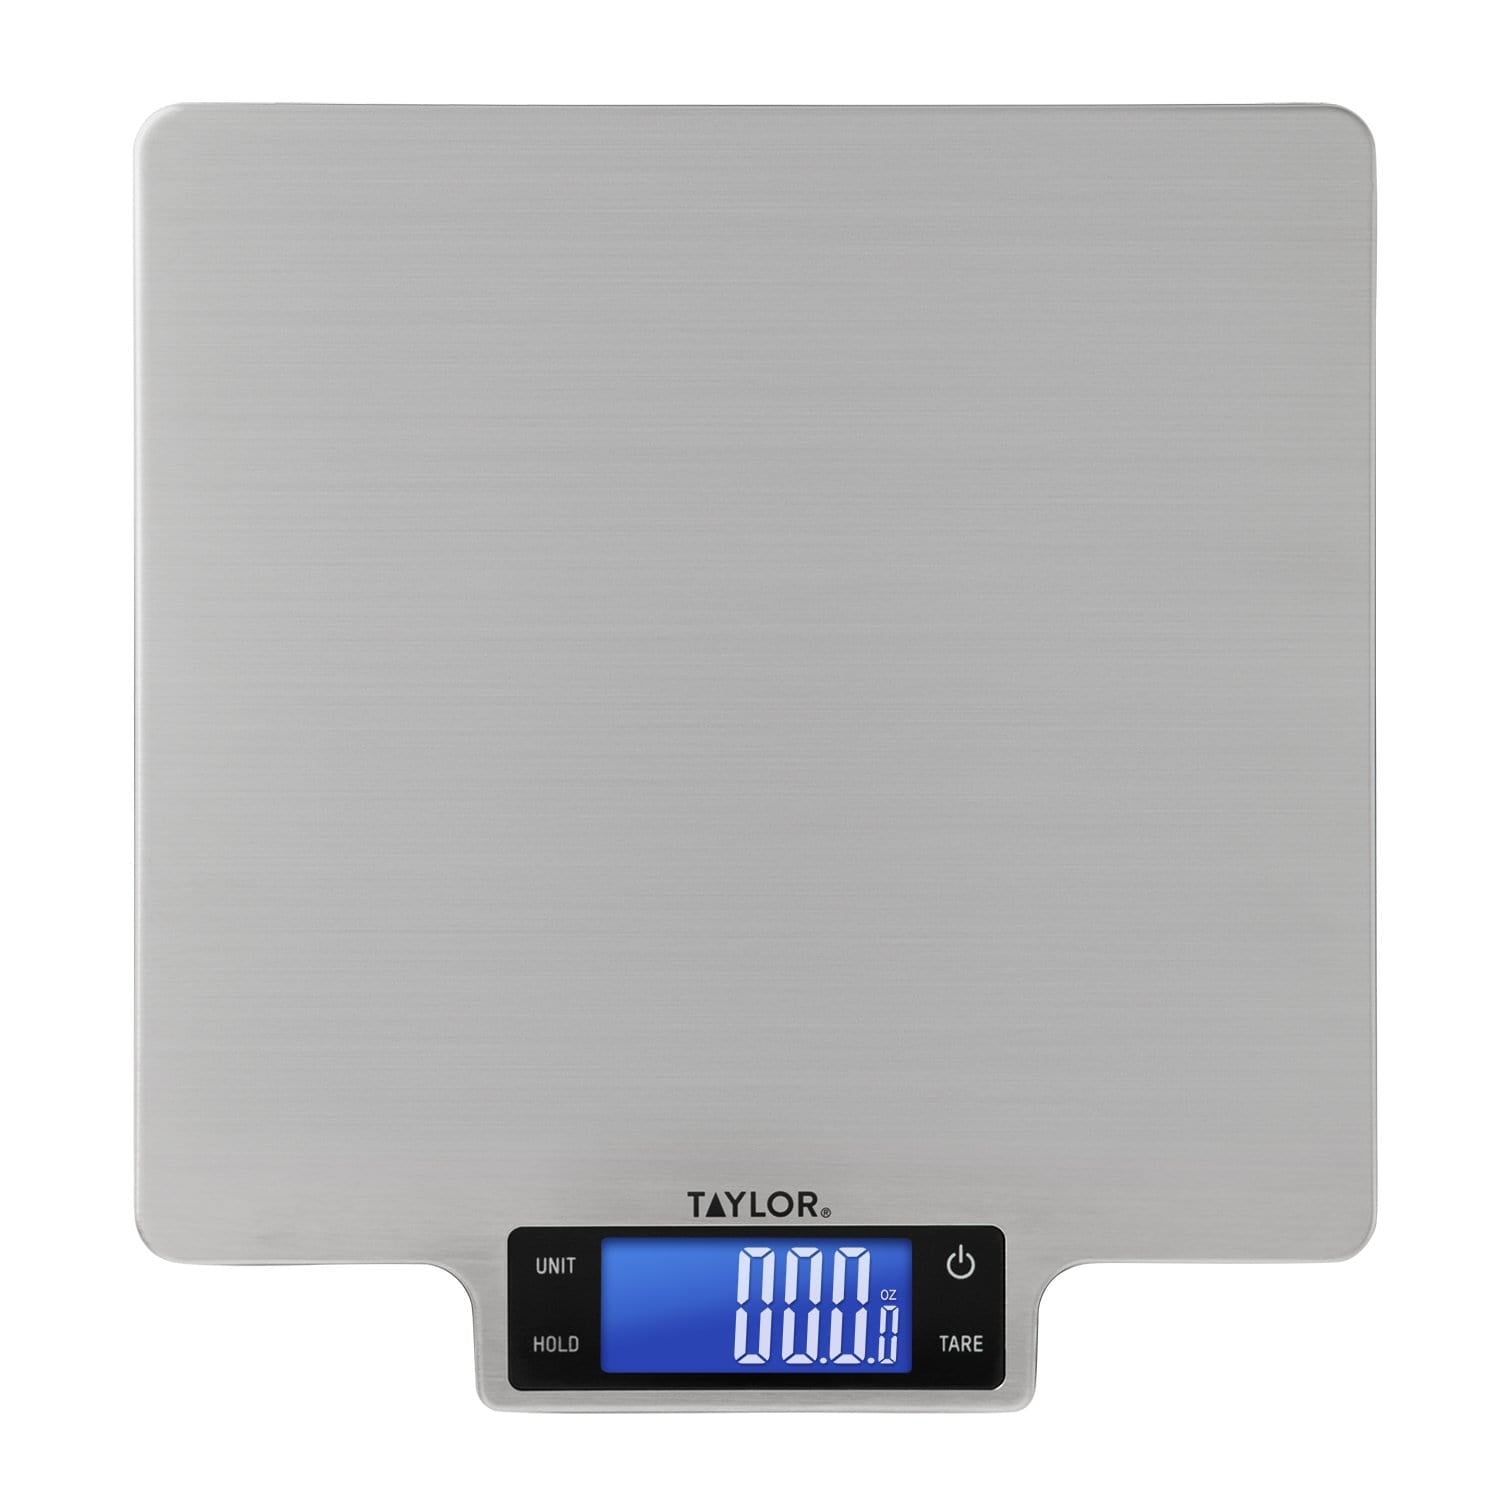 Stainless Steel Food Scale